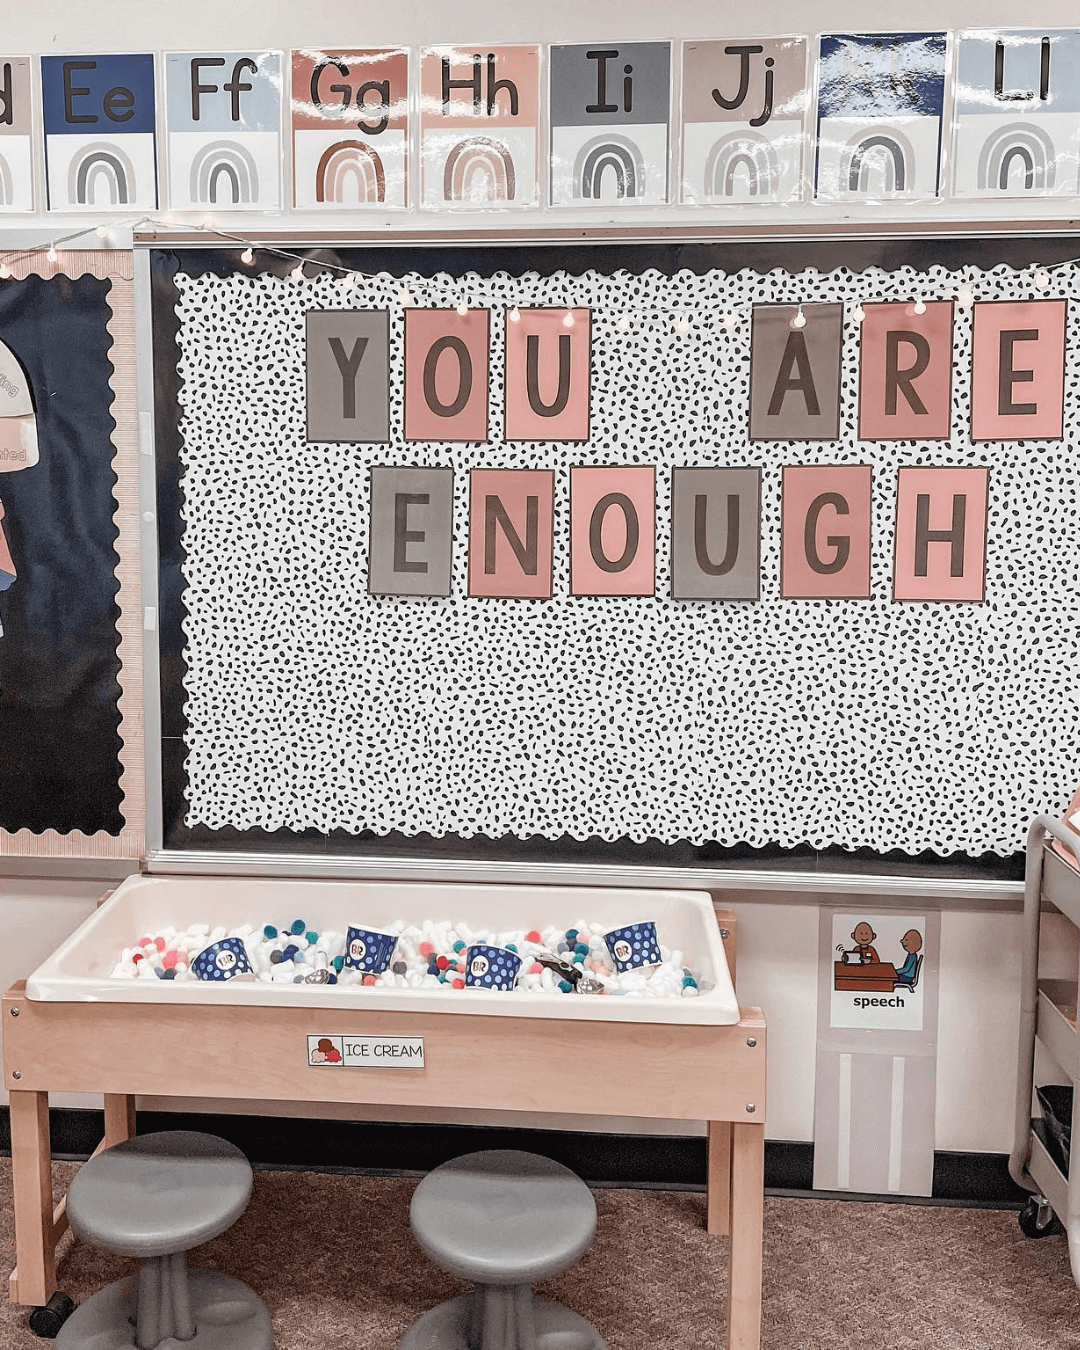 The left image shows a series of items from the classroom jobs resource, it includes small cutouts with jobs like ‘librarian’ and ‘recess helper.’ The right image shows a wall display that says ‘you are enough’ from the neutral Boho Rainbow Lettering Pack.